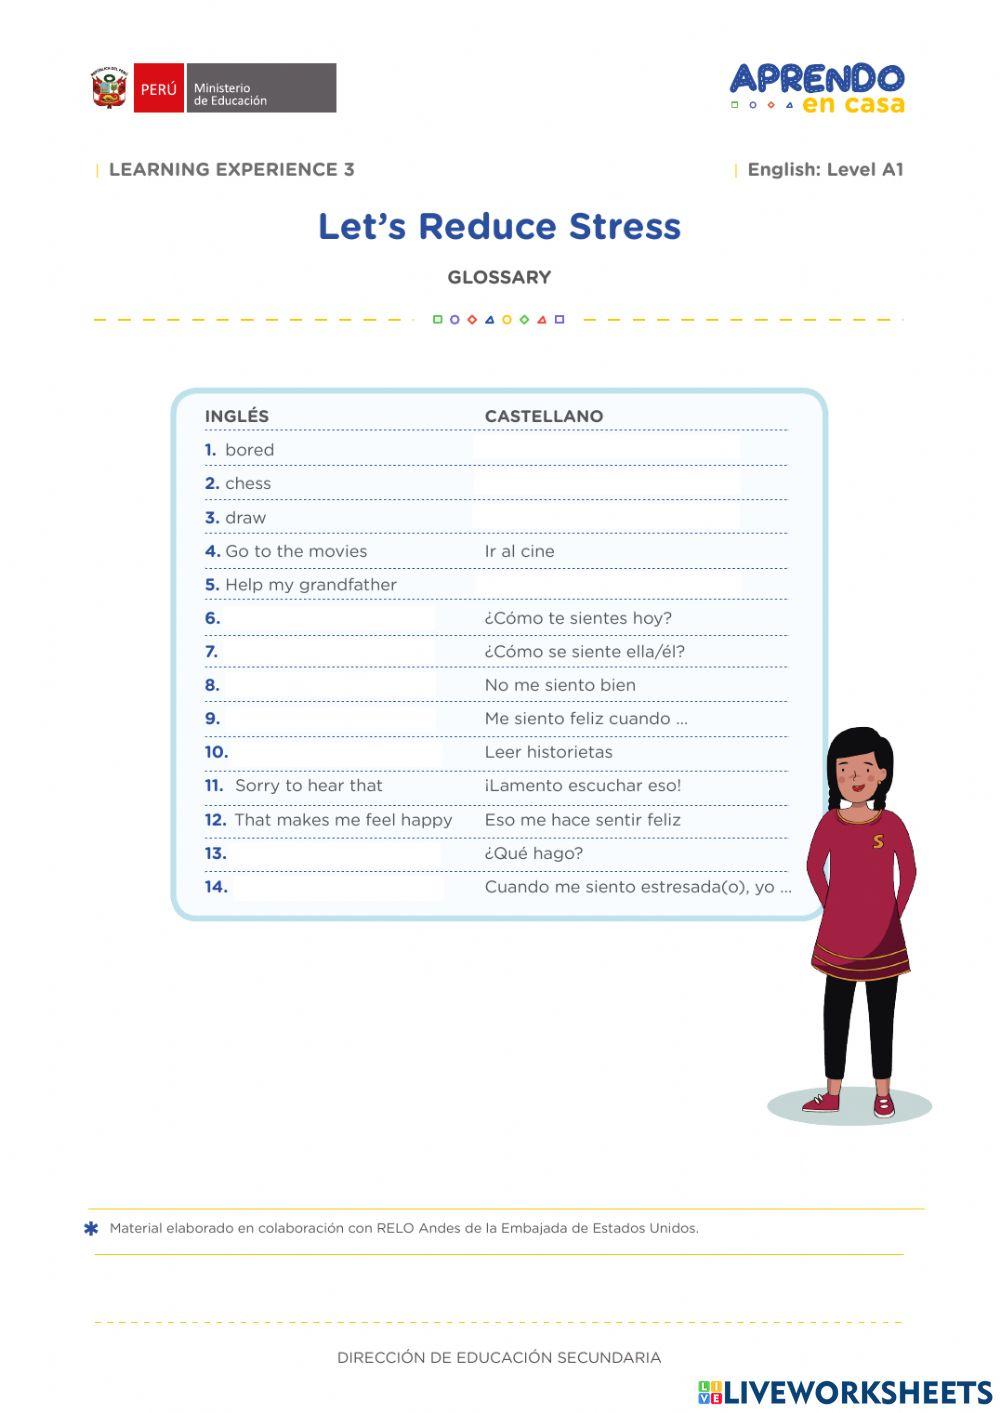 Let's reduce stress